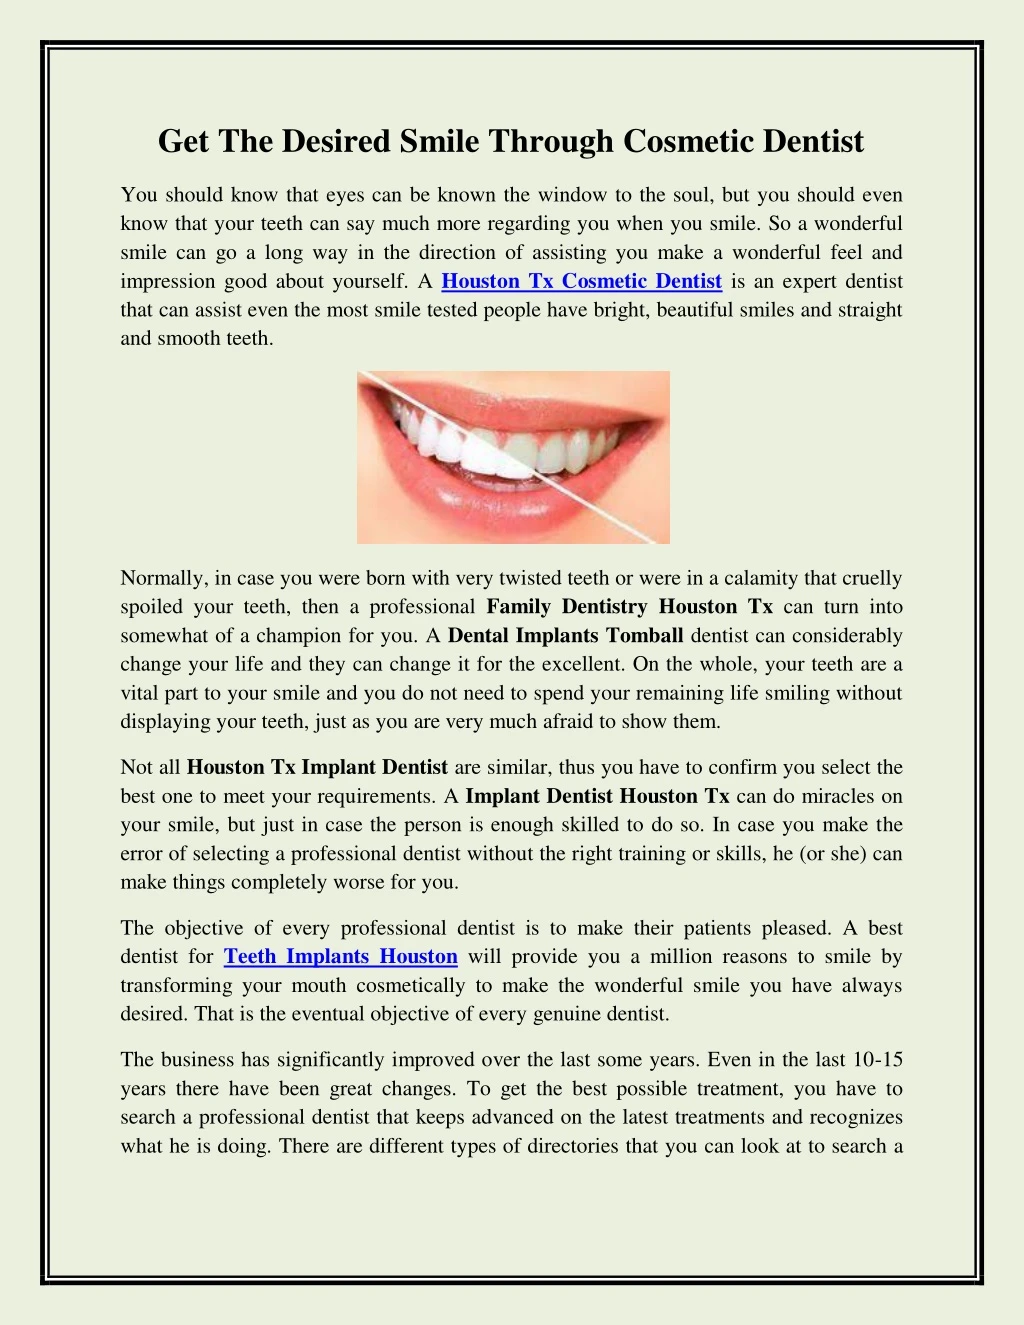 get the desired smile through cosmetic dentist